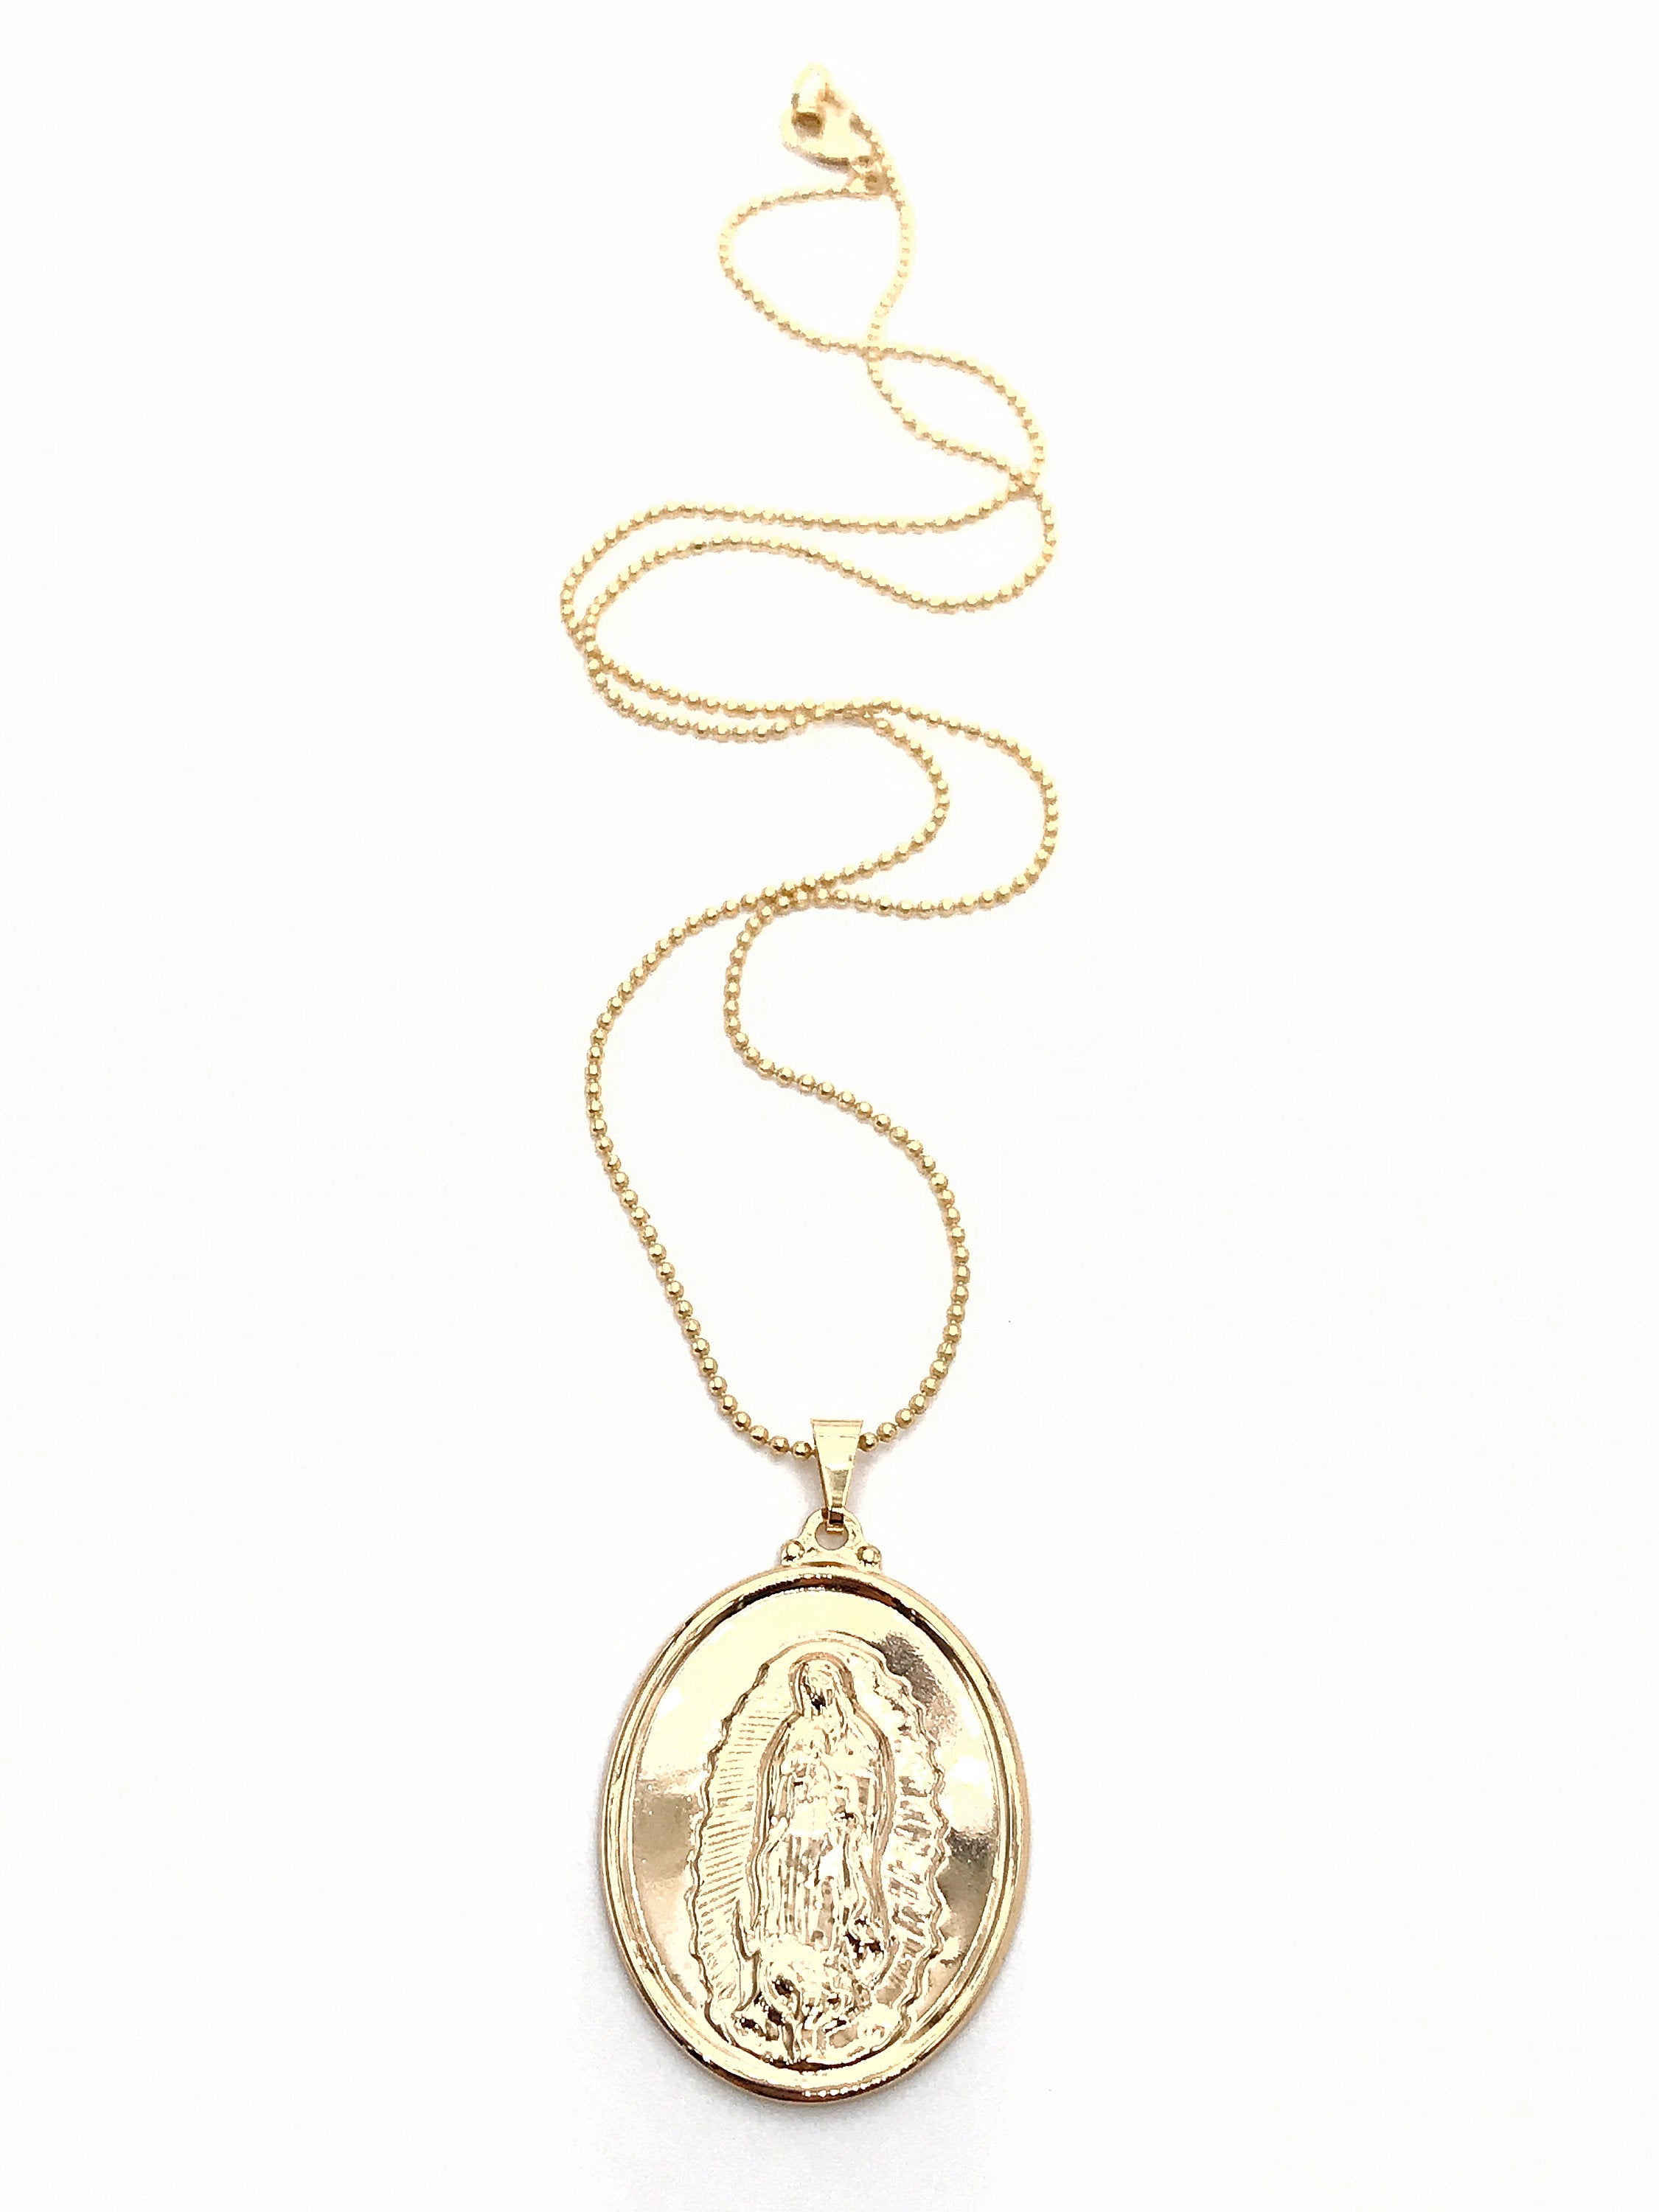 Our lady of Guadalupe Necklace